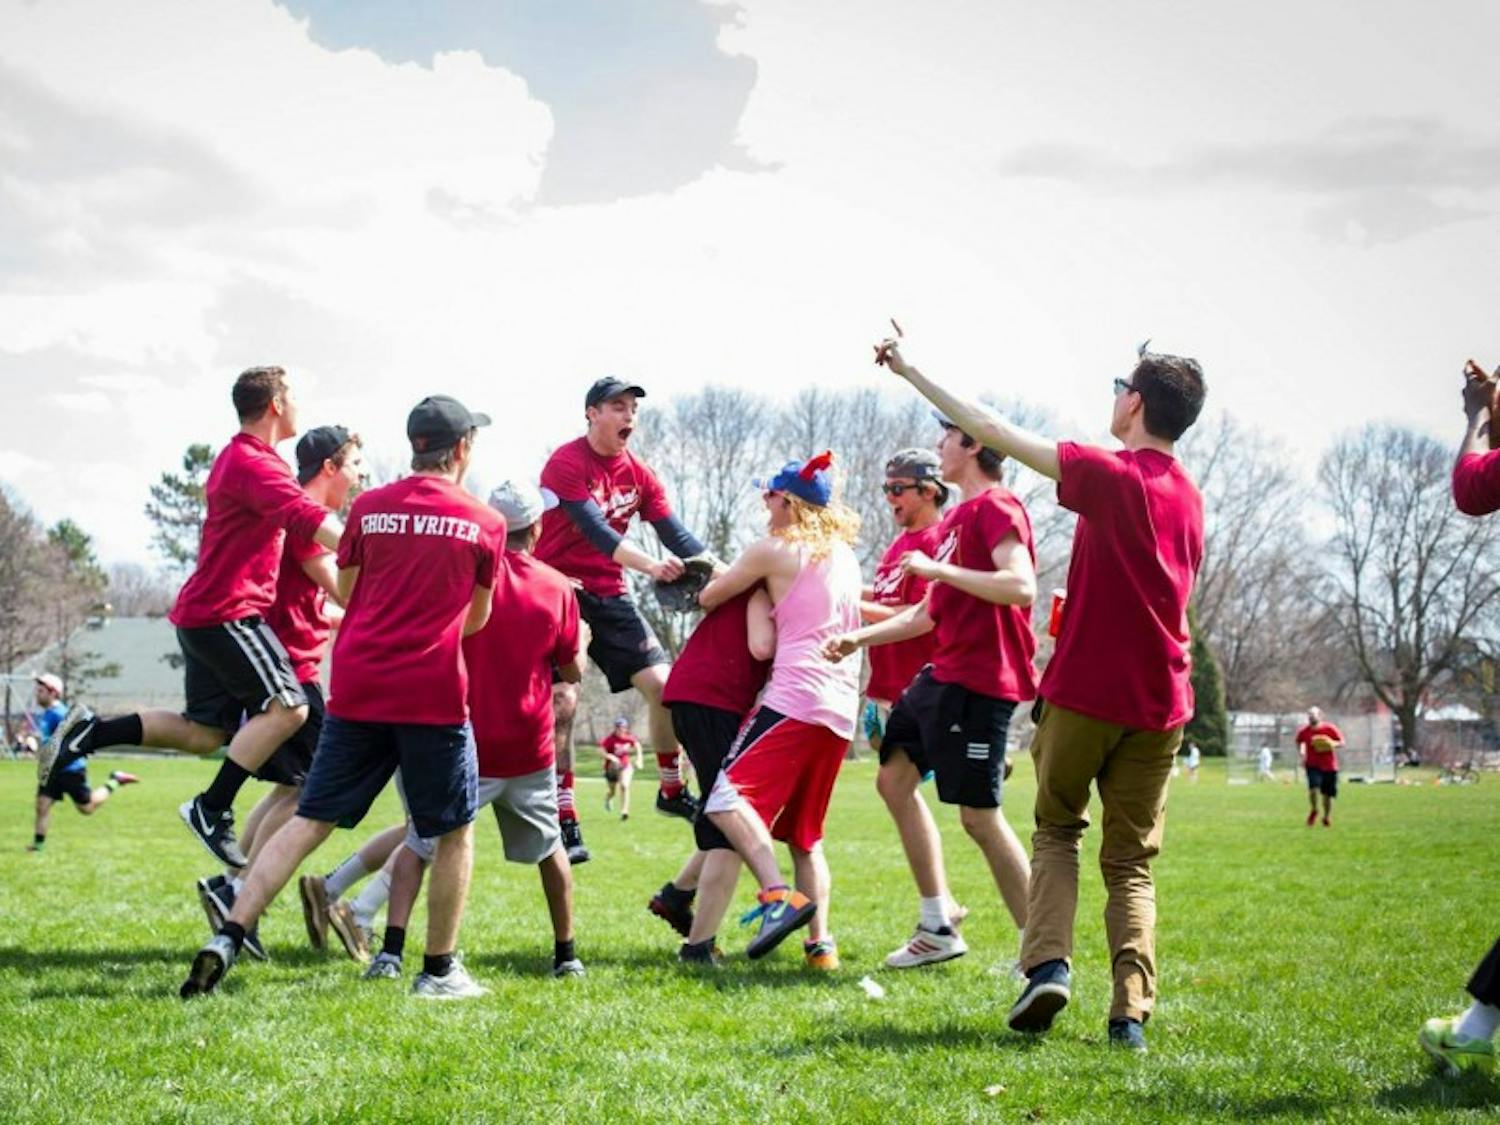 The Dirty Birds celebrating their 7-5 victory in a softball game against the Badger Herald&nbsp;in 2016. Analysts say the margin will be much larger this year, which has prompted speculation that the Gentle Clowns might not show up Saturday.